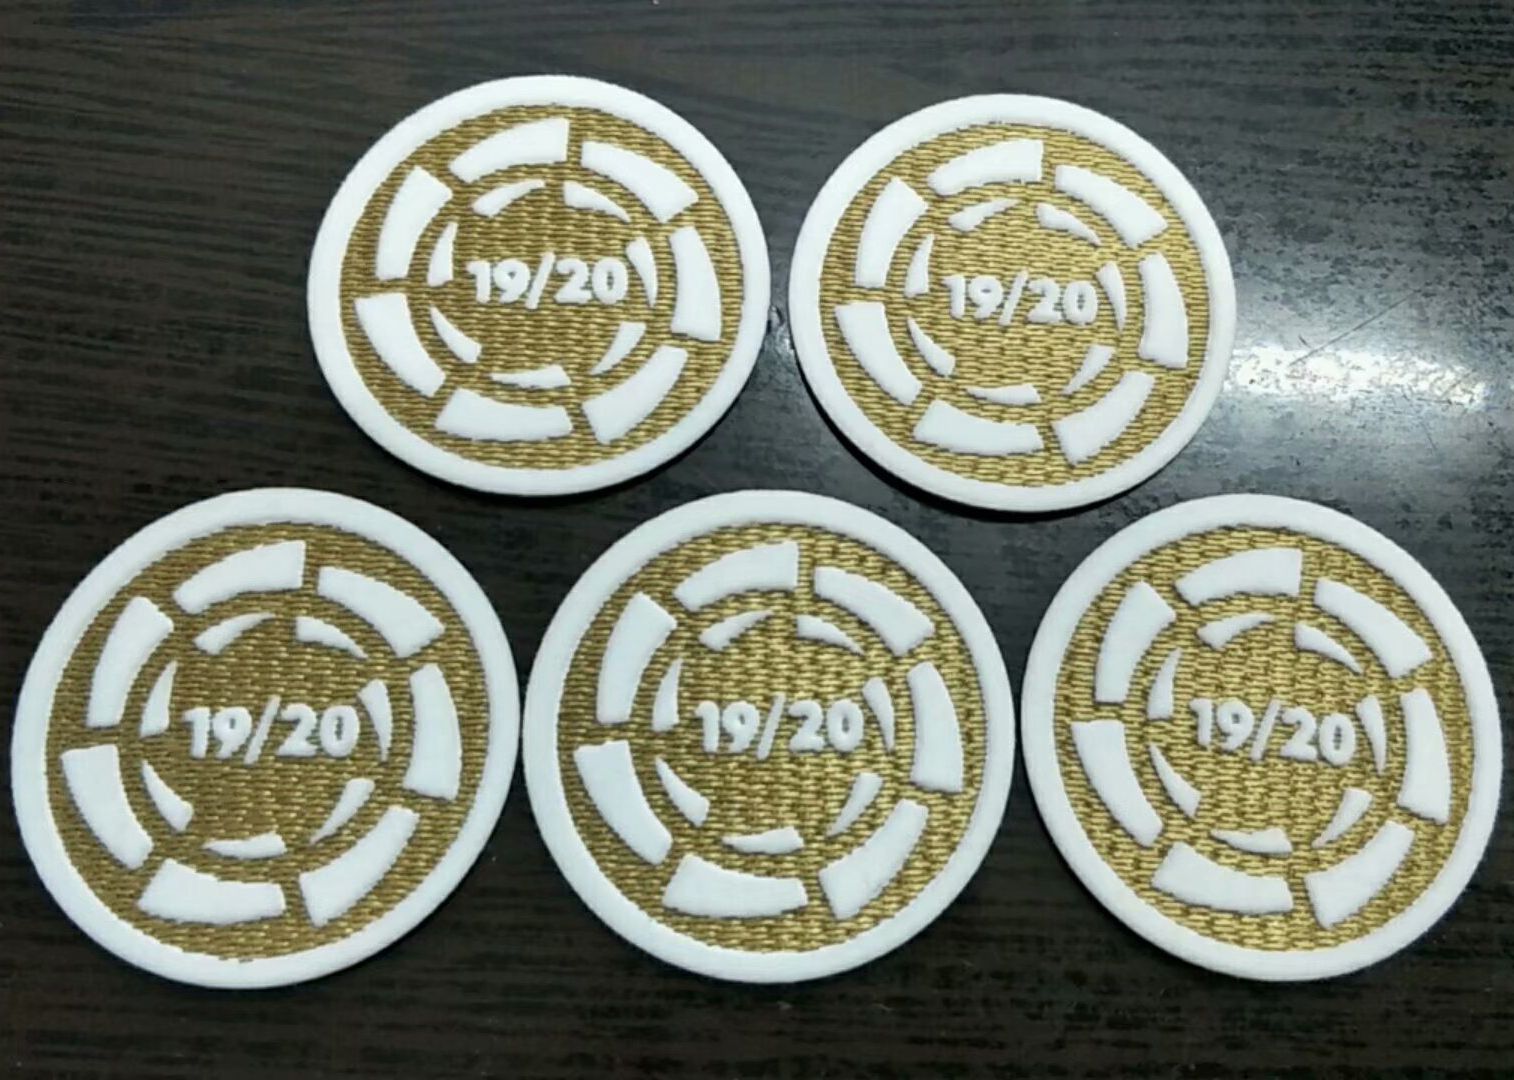 La Liga 19/20 Champions Patch Madddriiiiid Liga Champion Patch Soccer Badge From Soccerpatches, $0.91 | DHgate.Com